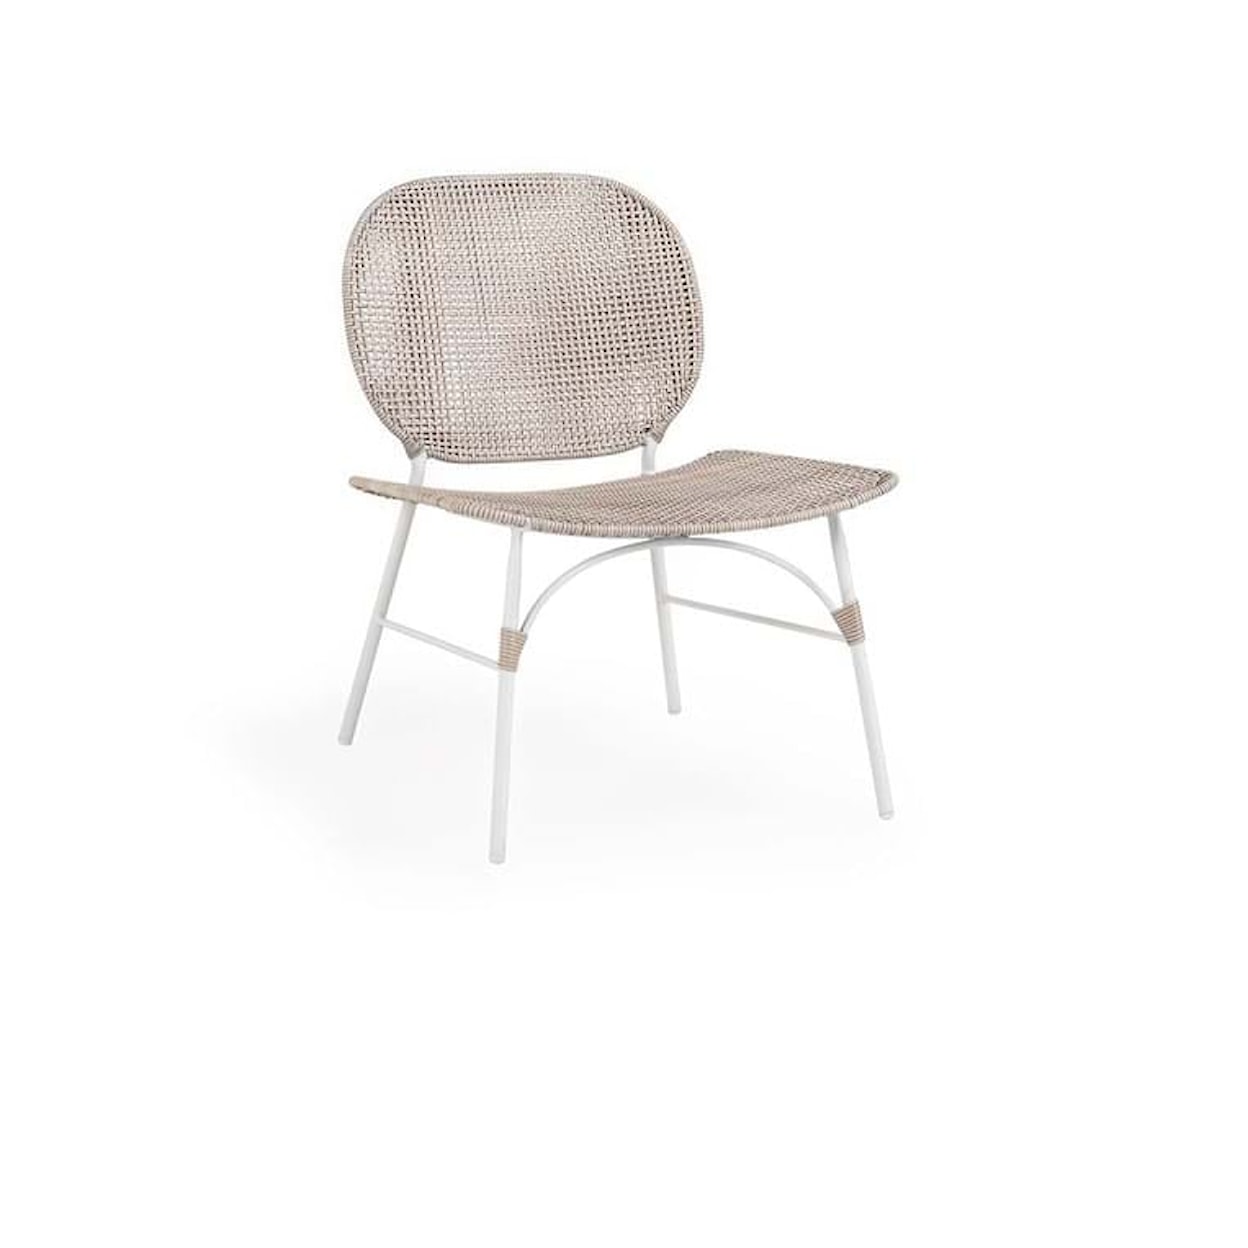 Classic Home Daisy Outdoor Chair